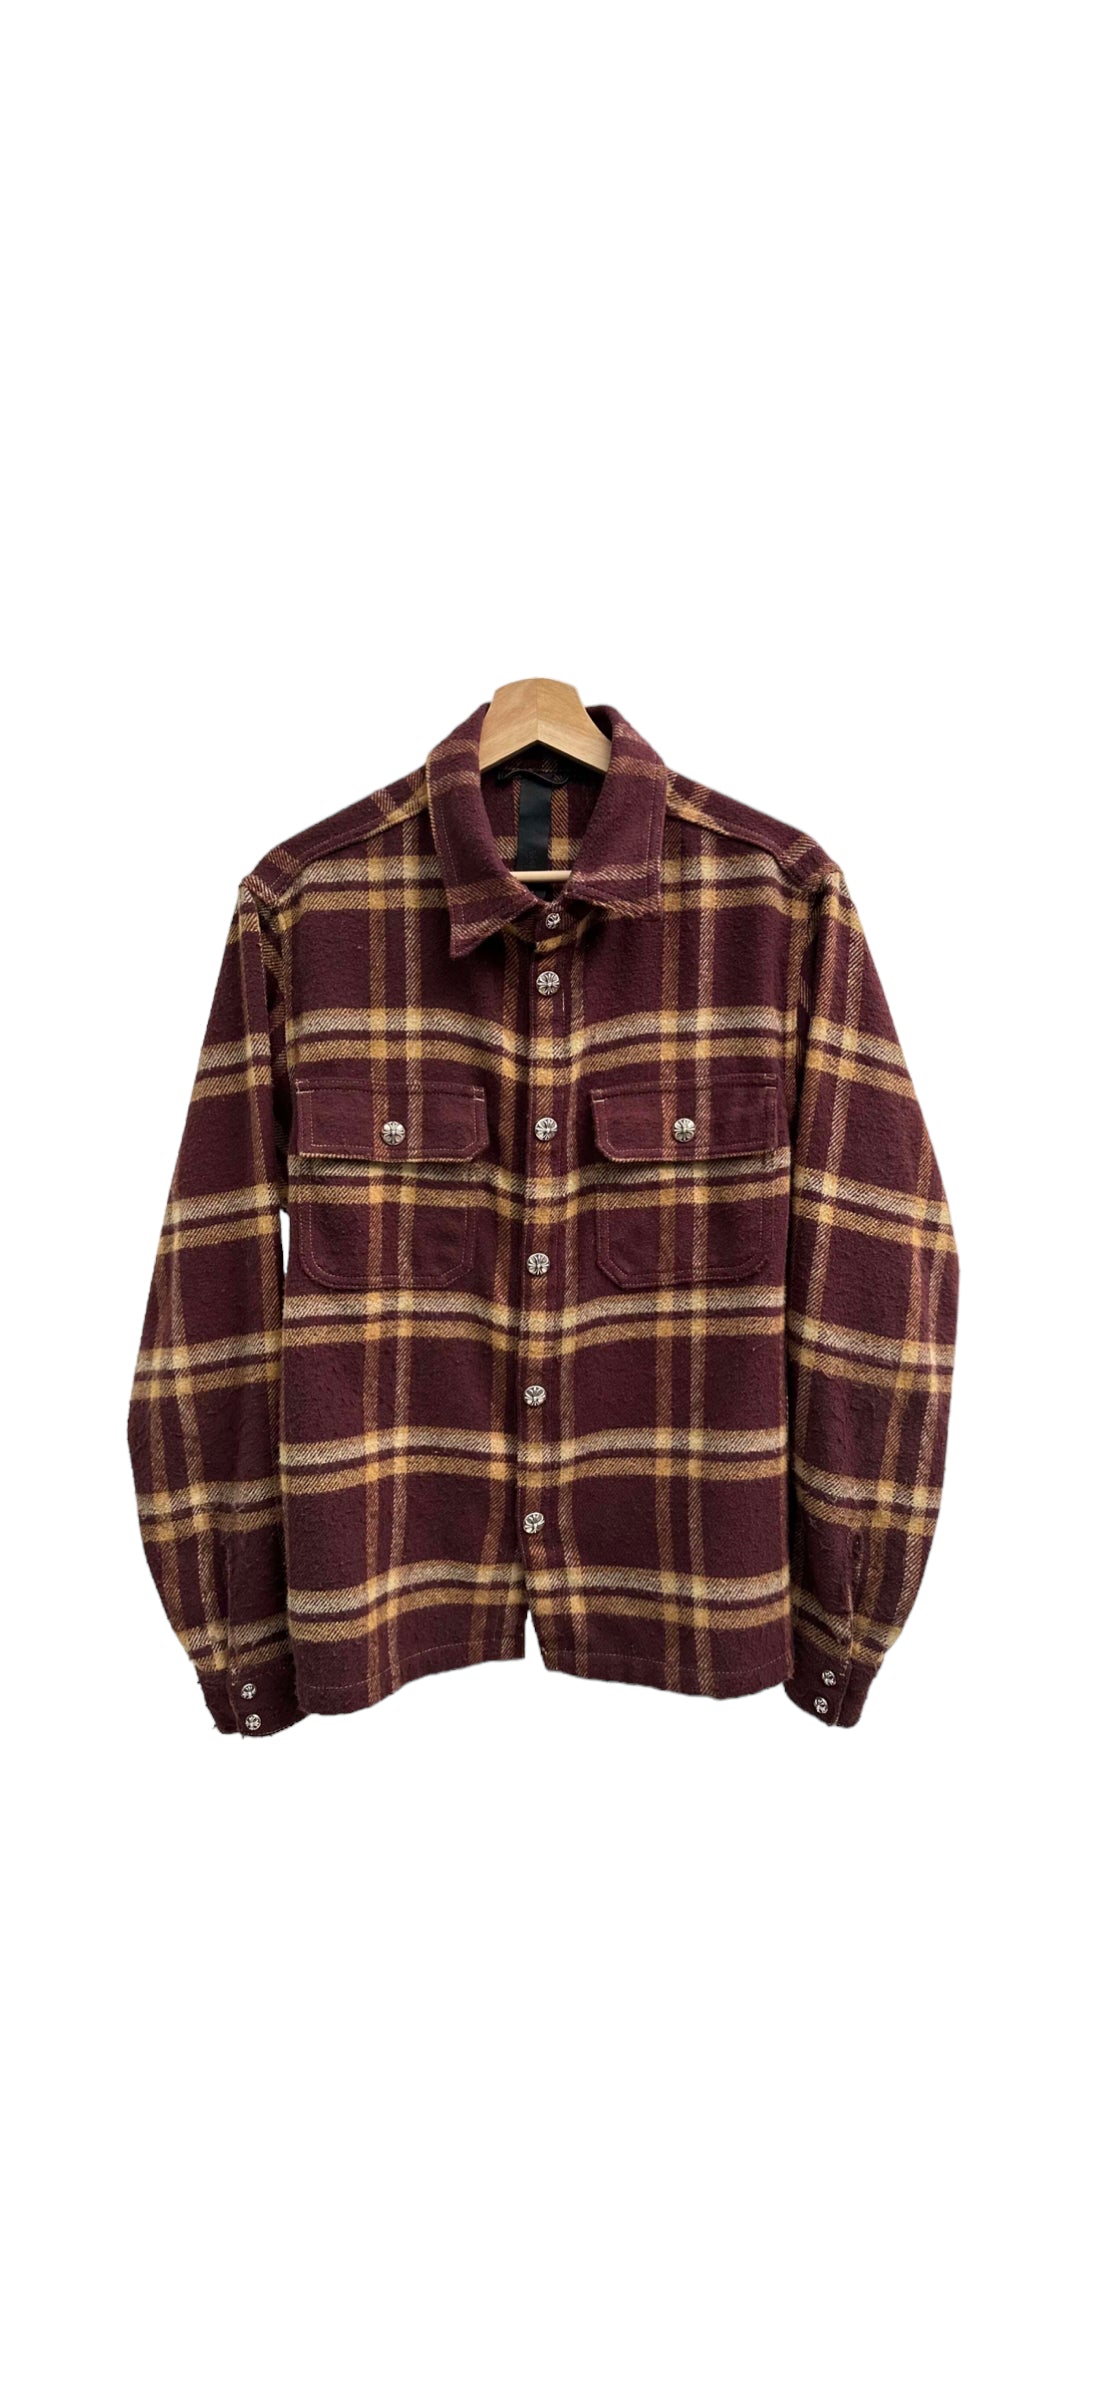 Chrome Hearts Flannel Button Up